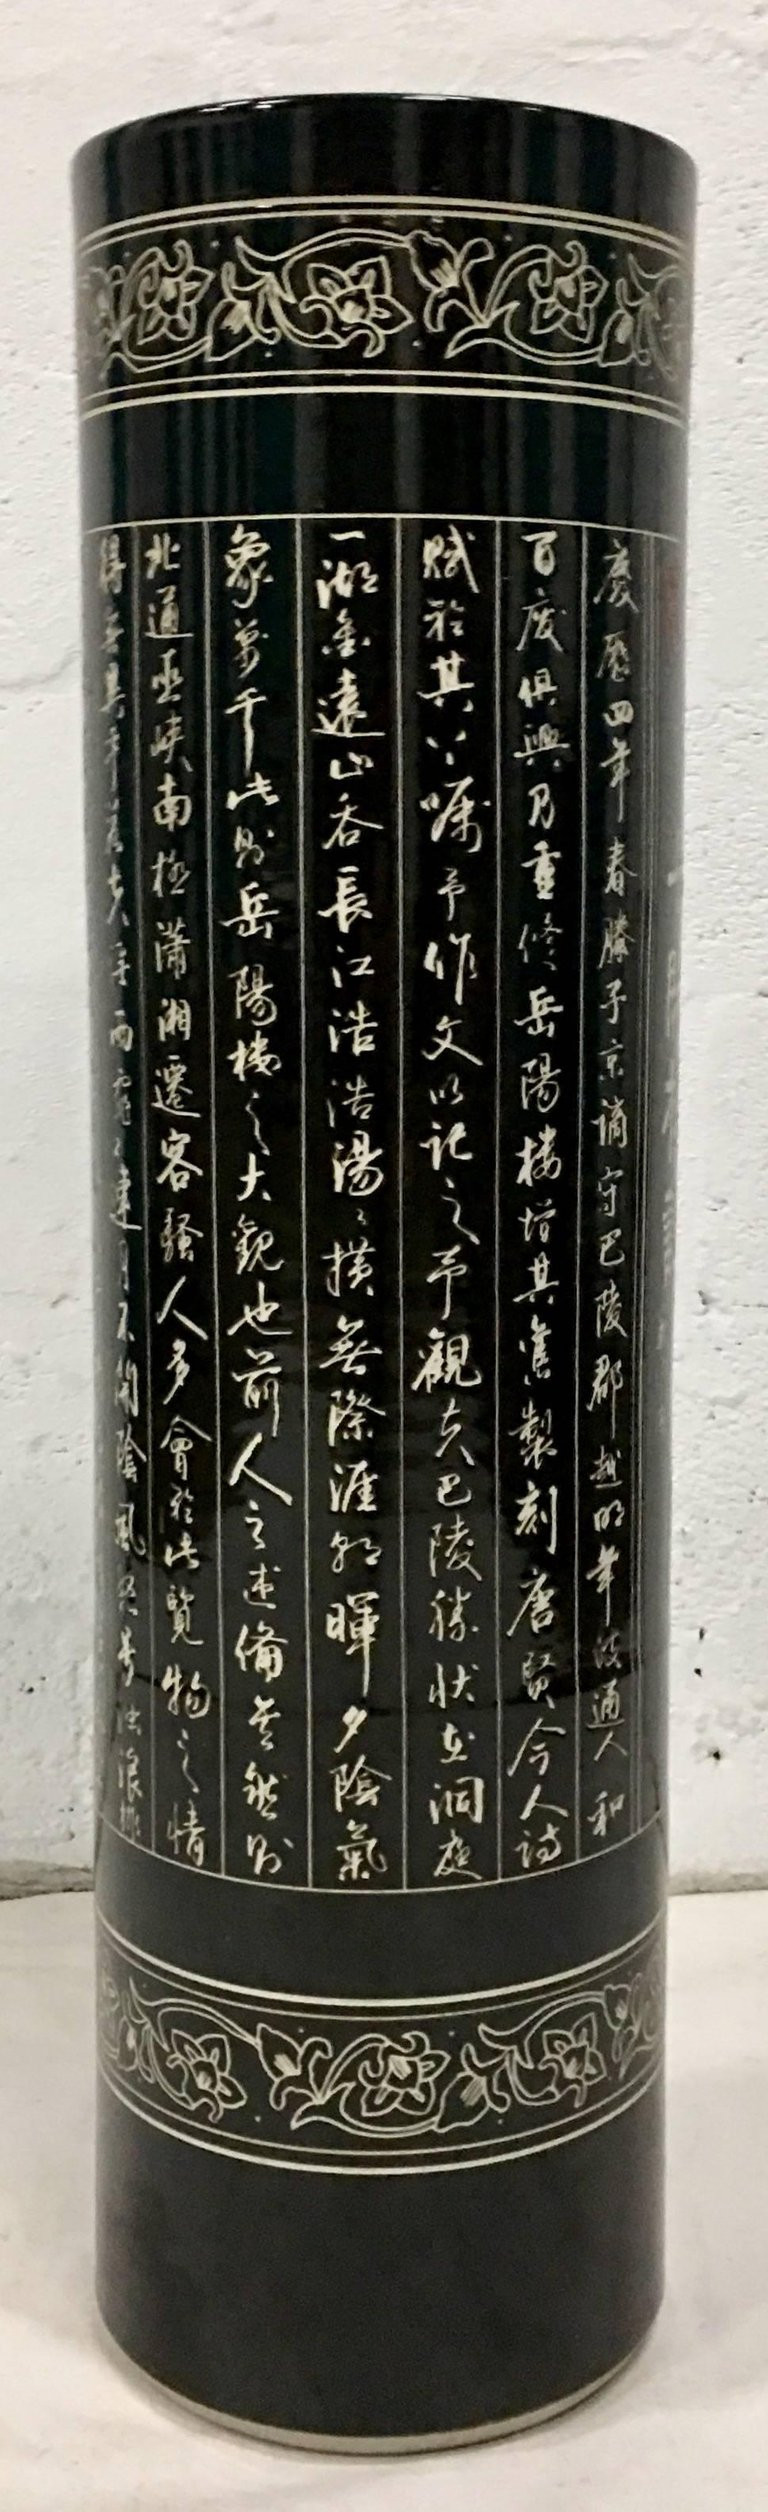 27 Spectacular Large Black Vases for Sale 2024 free download large black vases for sale of vintage chinese ceramic calligraphy tall umbrella stand vase for pertaining to mid century large black and white ceramic hand painted calligraphy floor vase